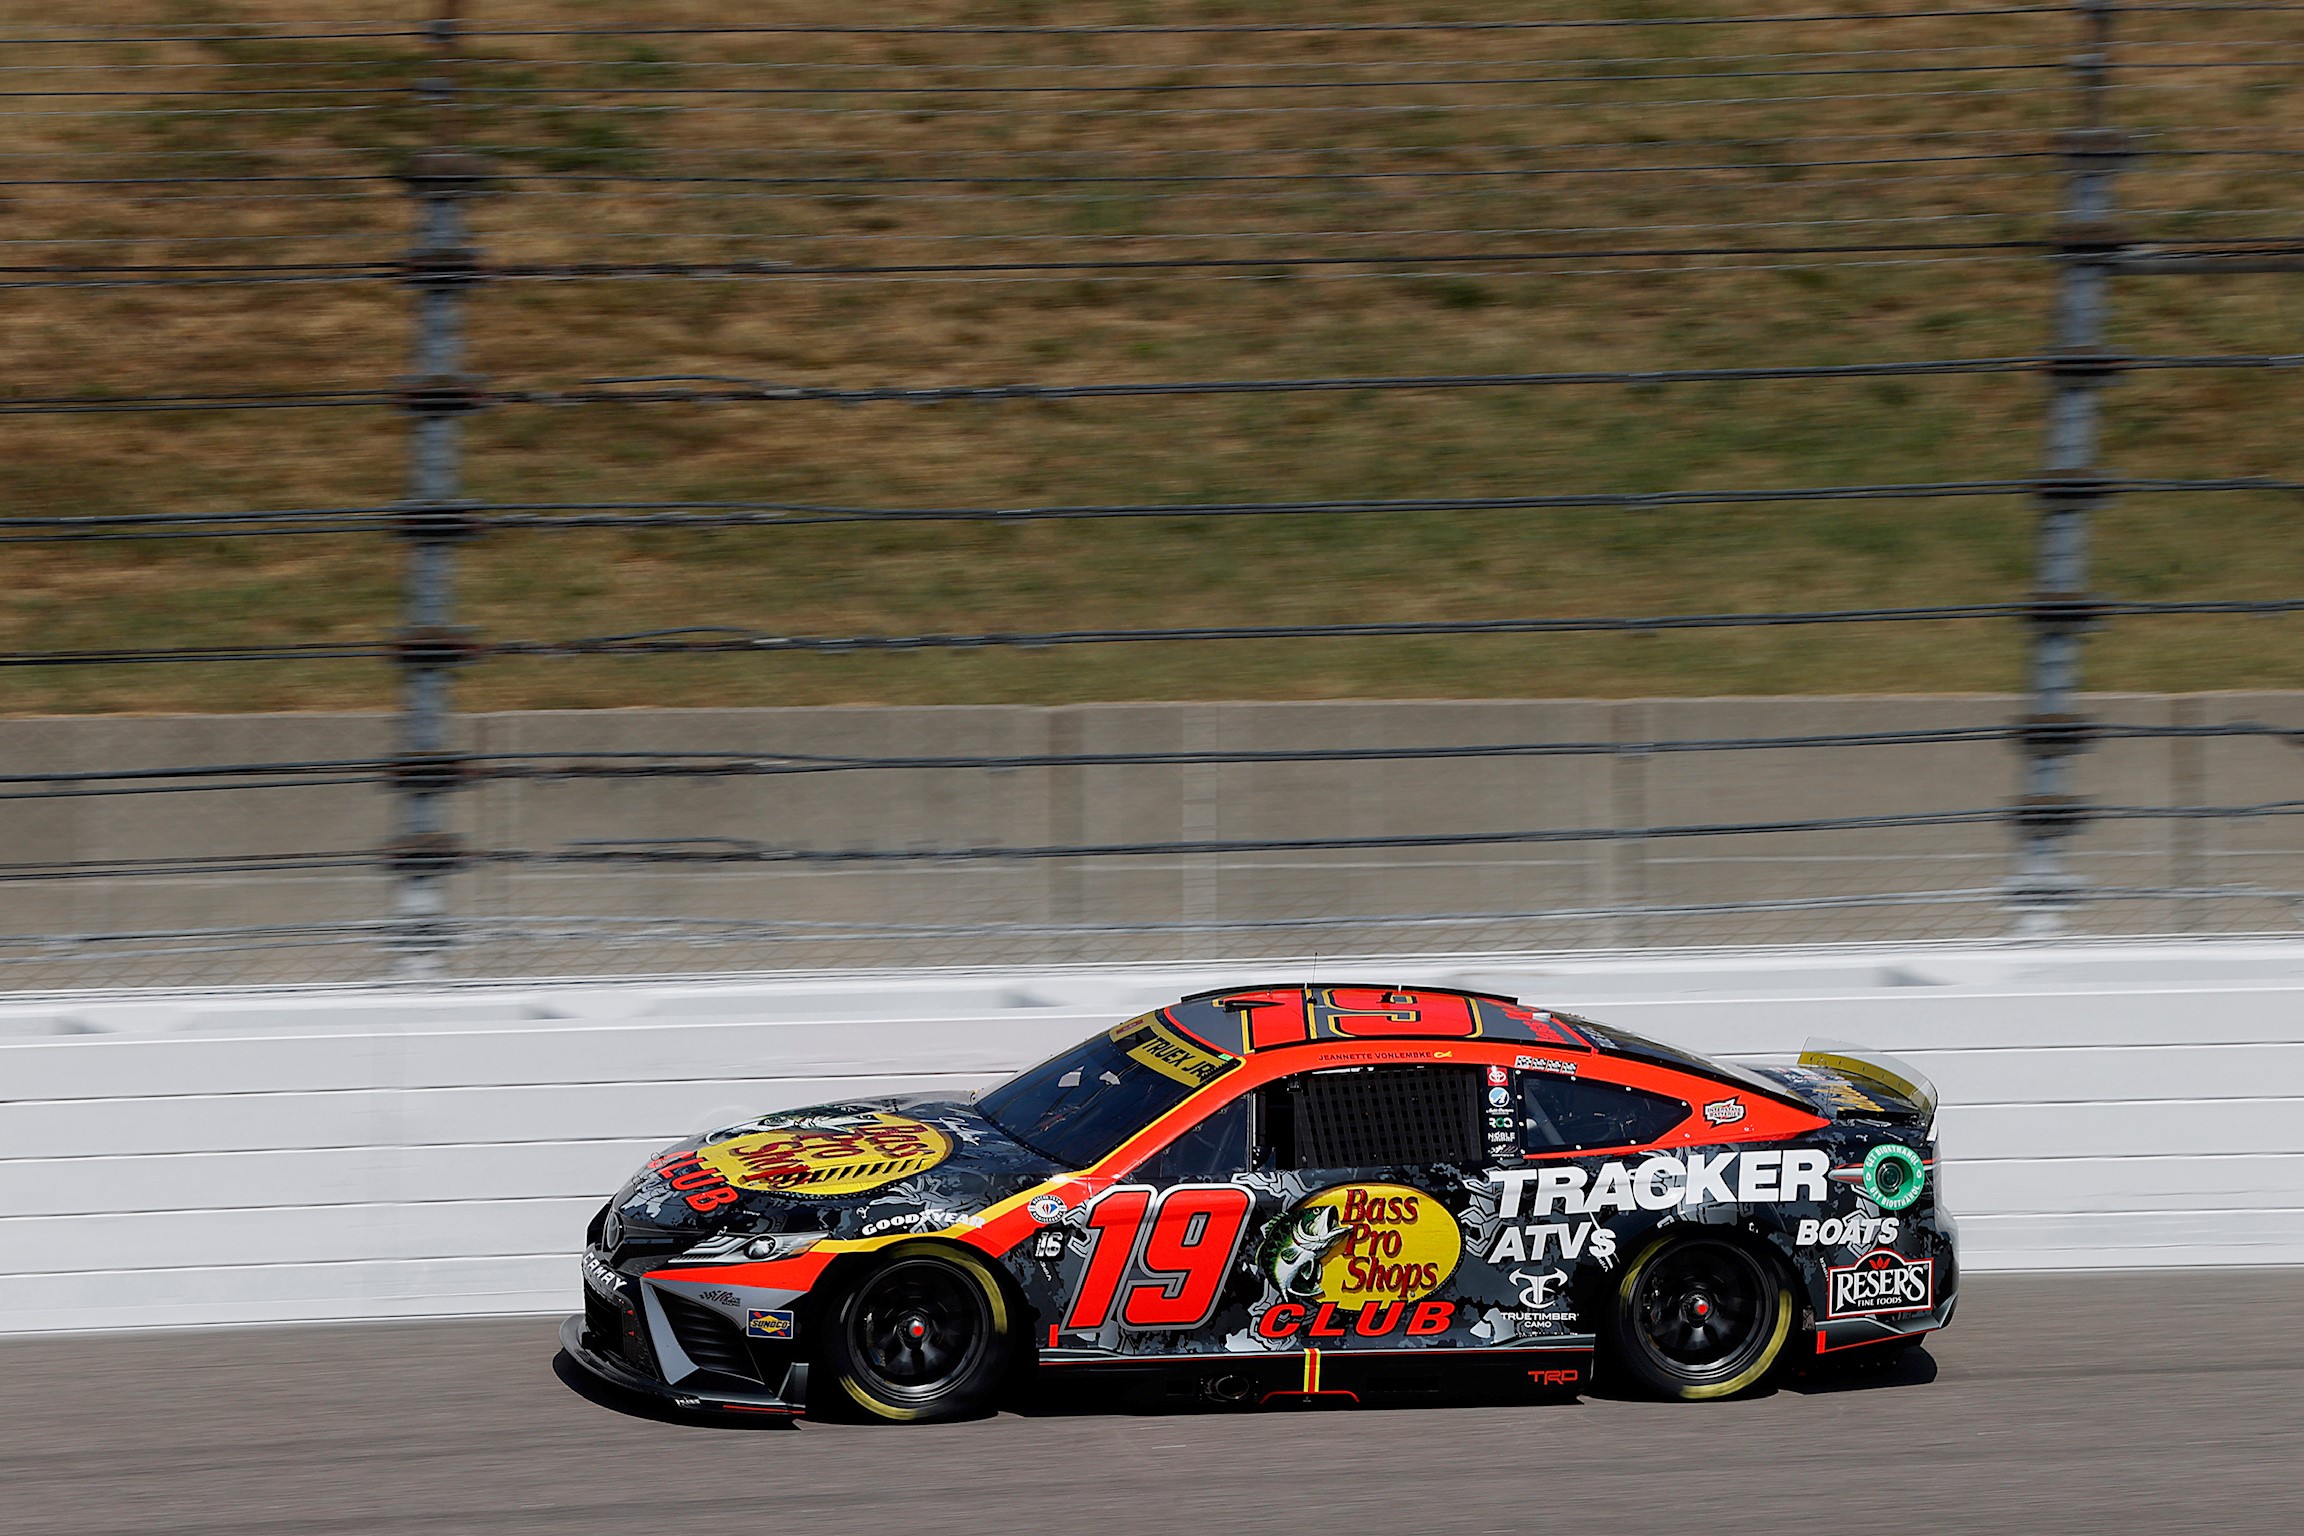 Martin Truex Jr. is 15/1 to win his 6th career Road Race